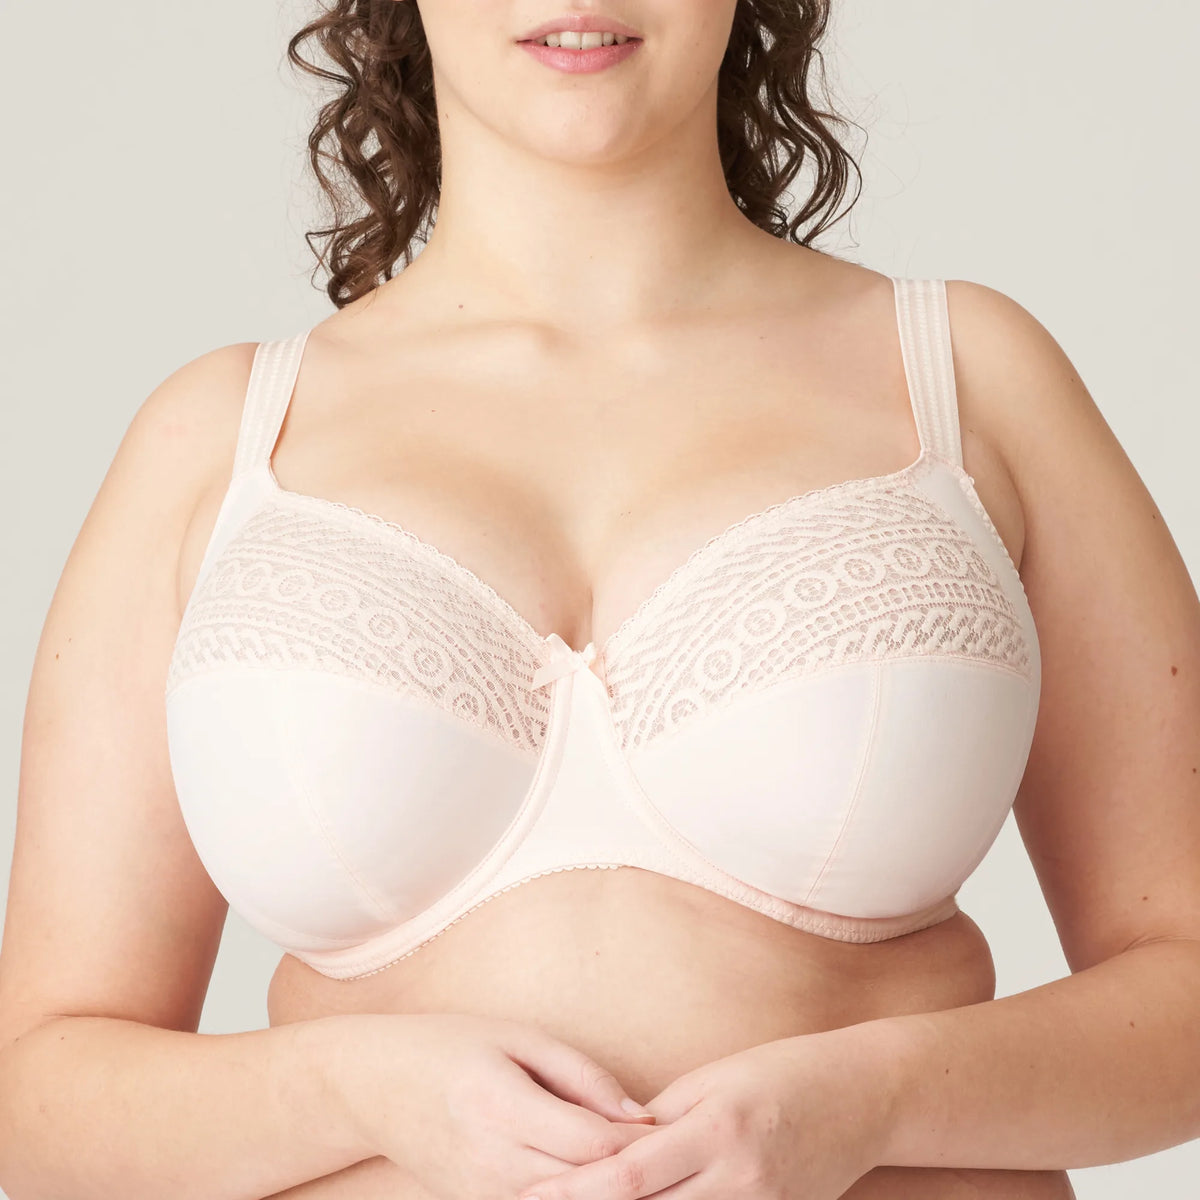 PrimaDonna Montara Full Cup Bra in Crystal Pink I To M Cup